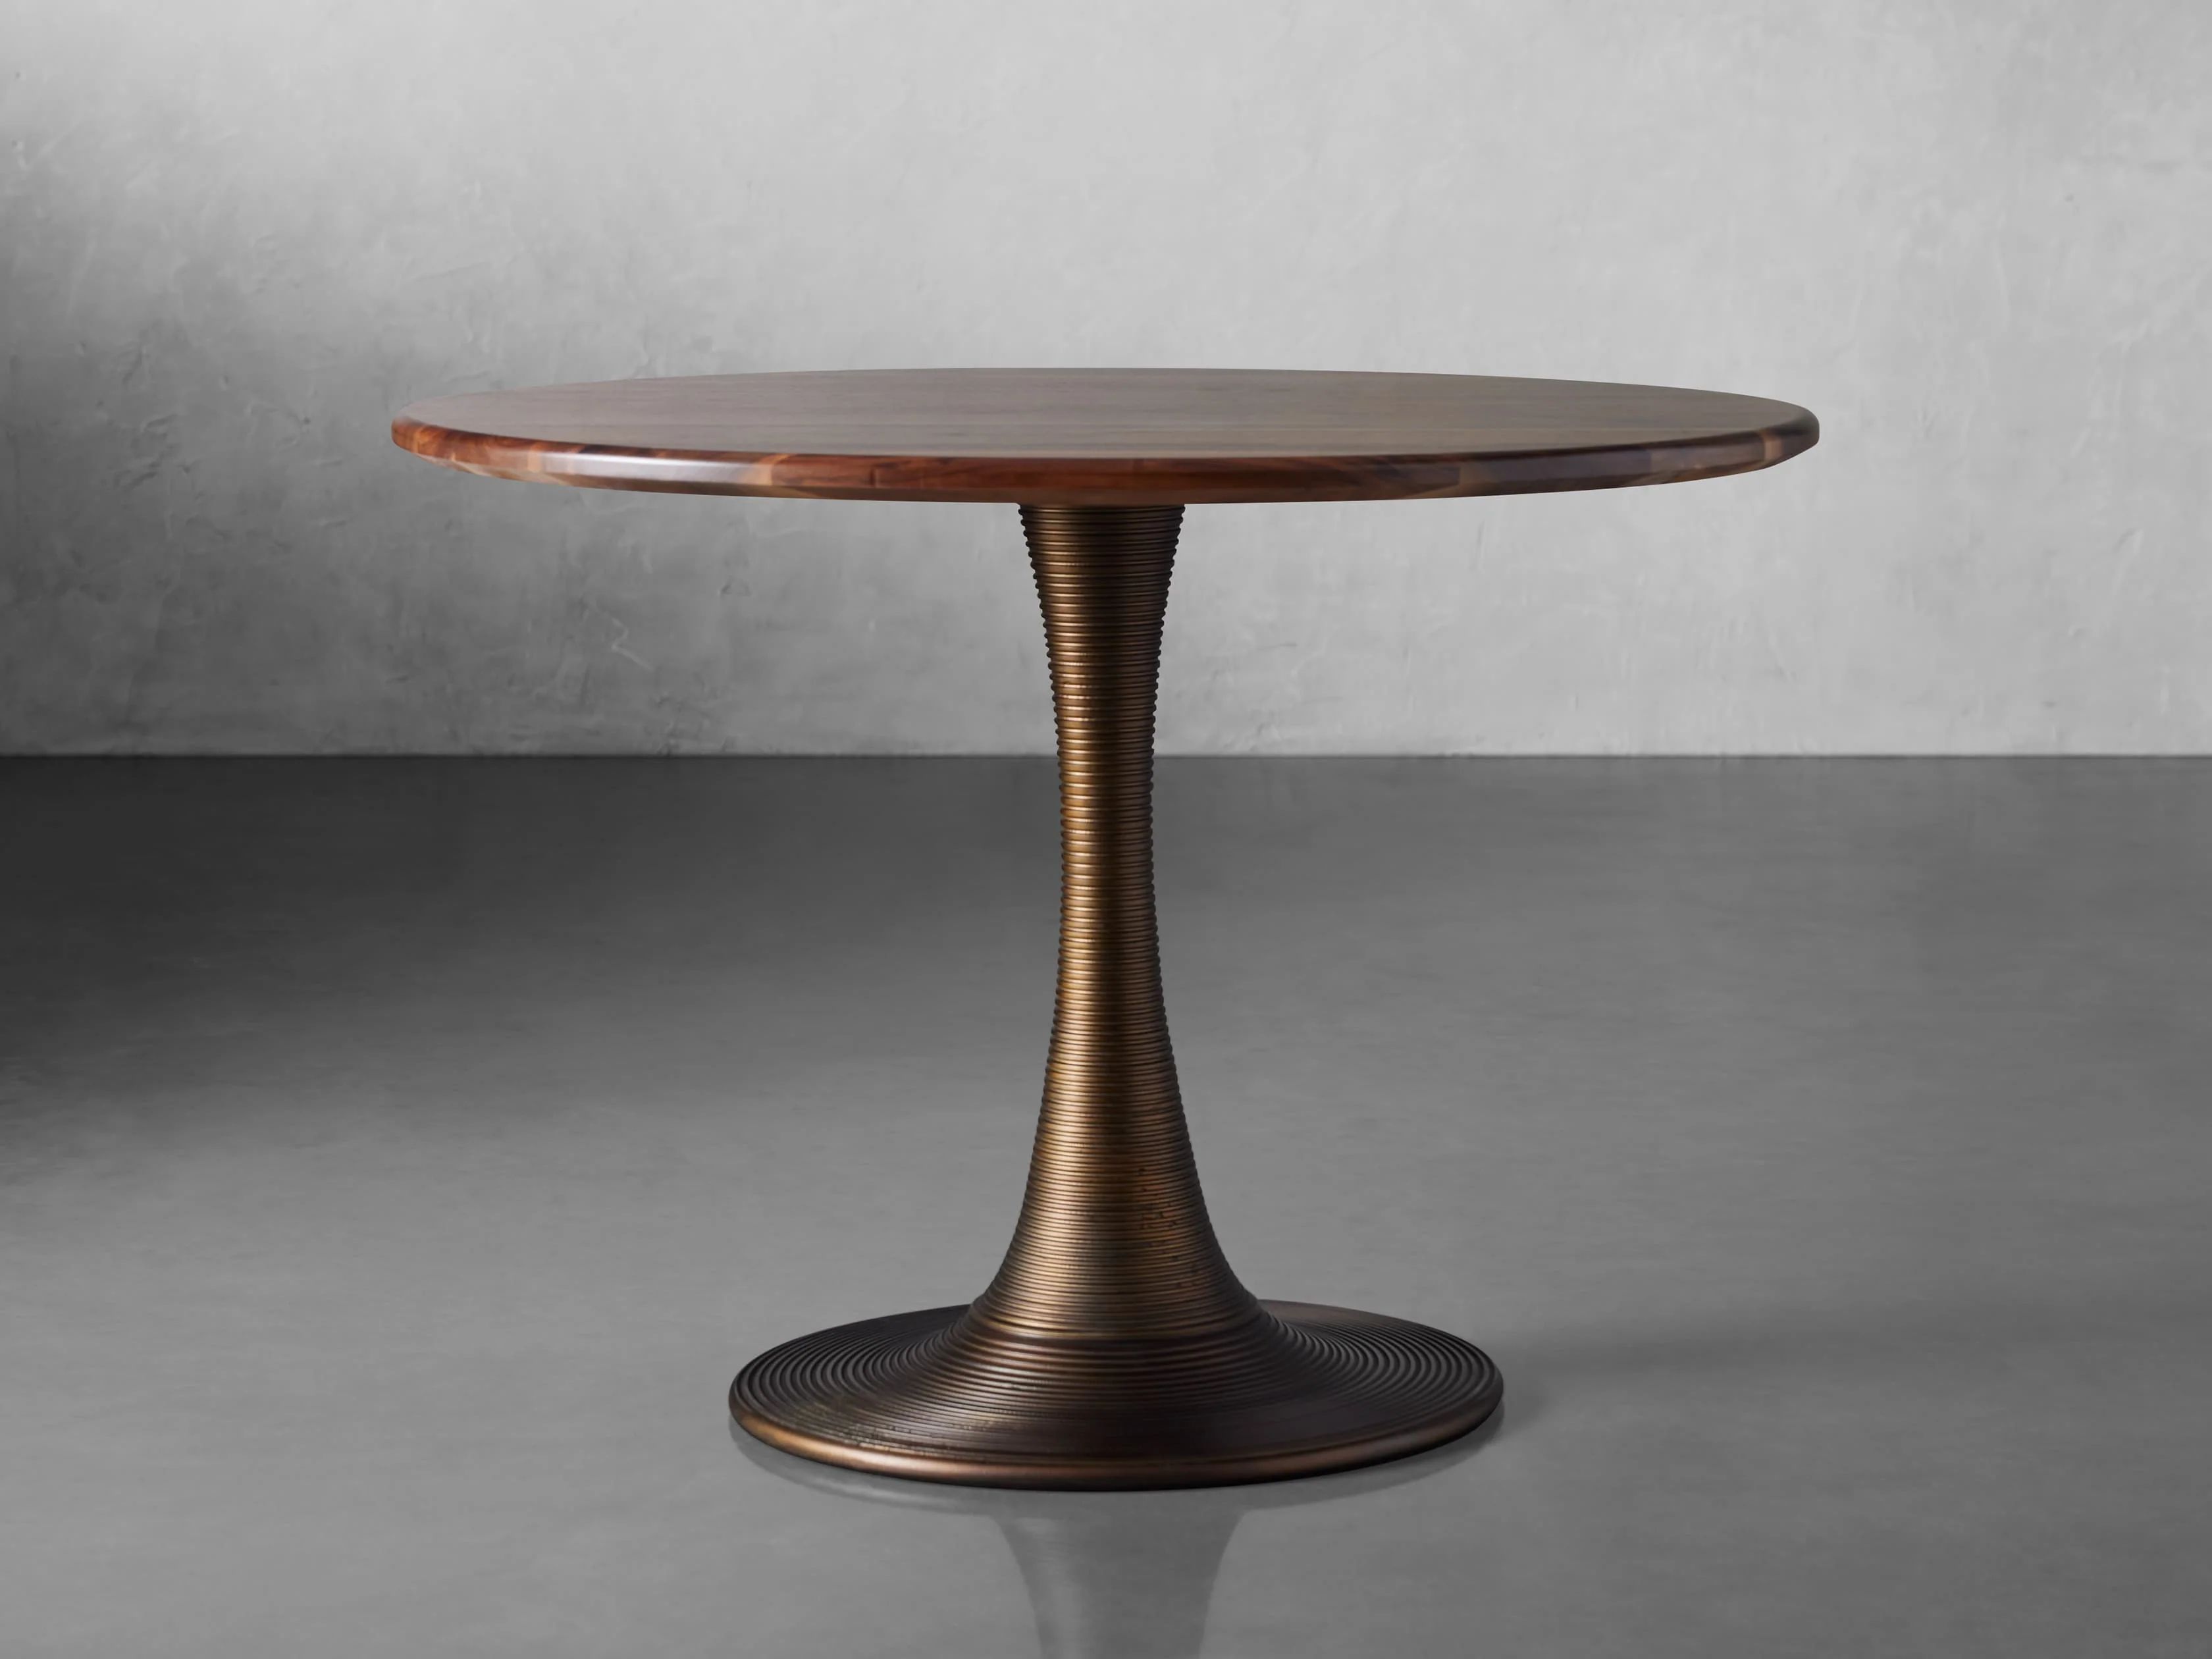 Jacob Bistro Table with Diaz Base in Antique Brass | Arhaus